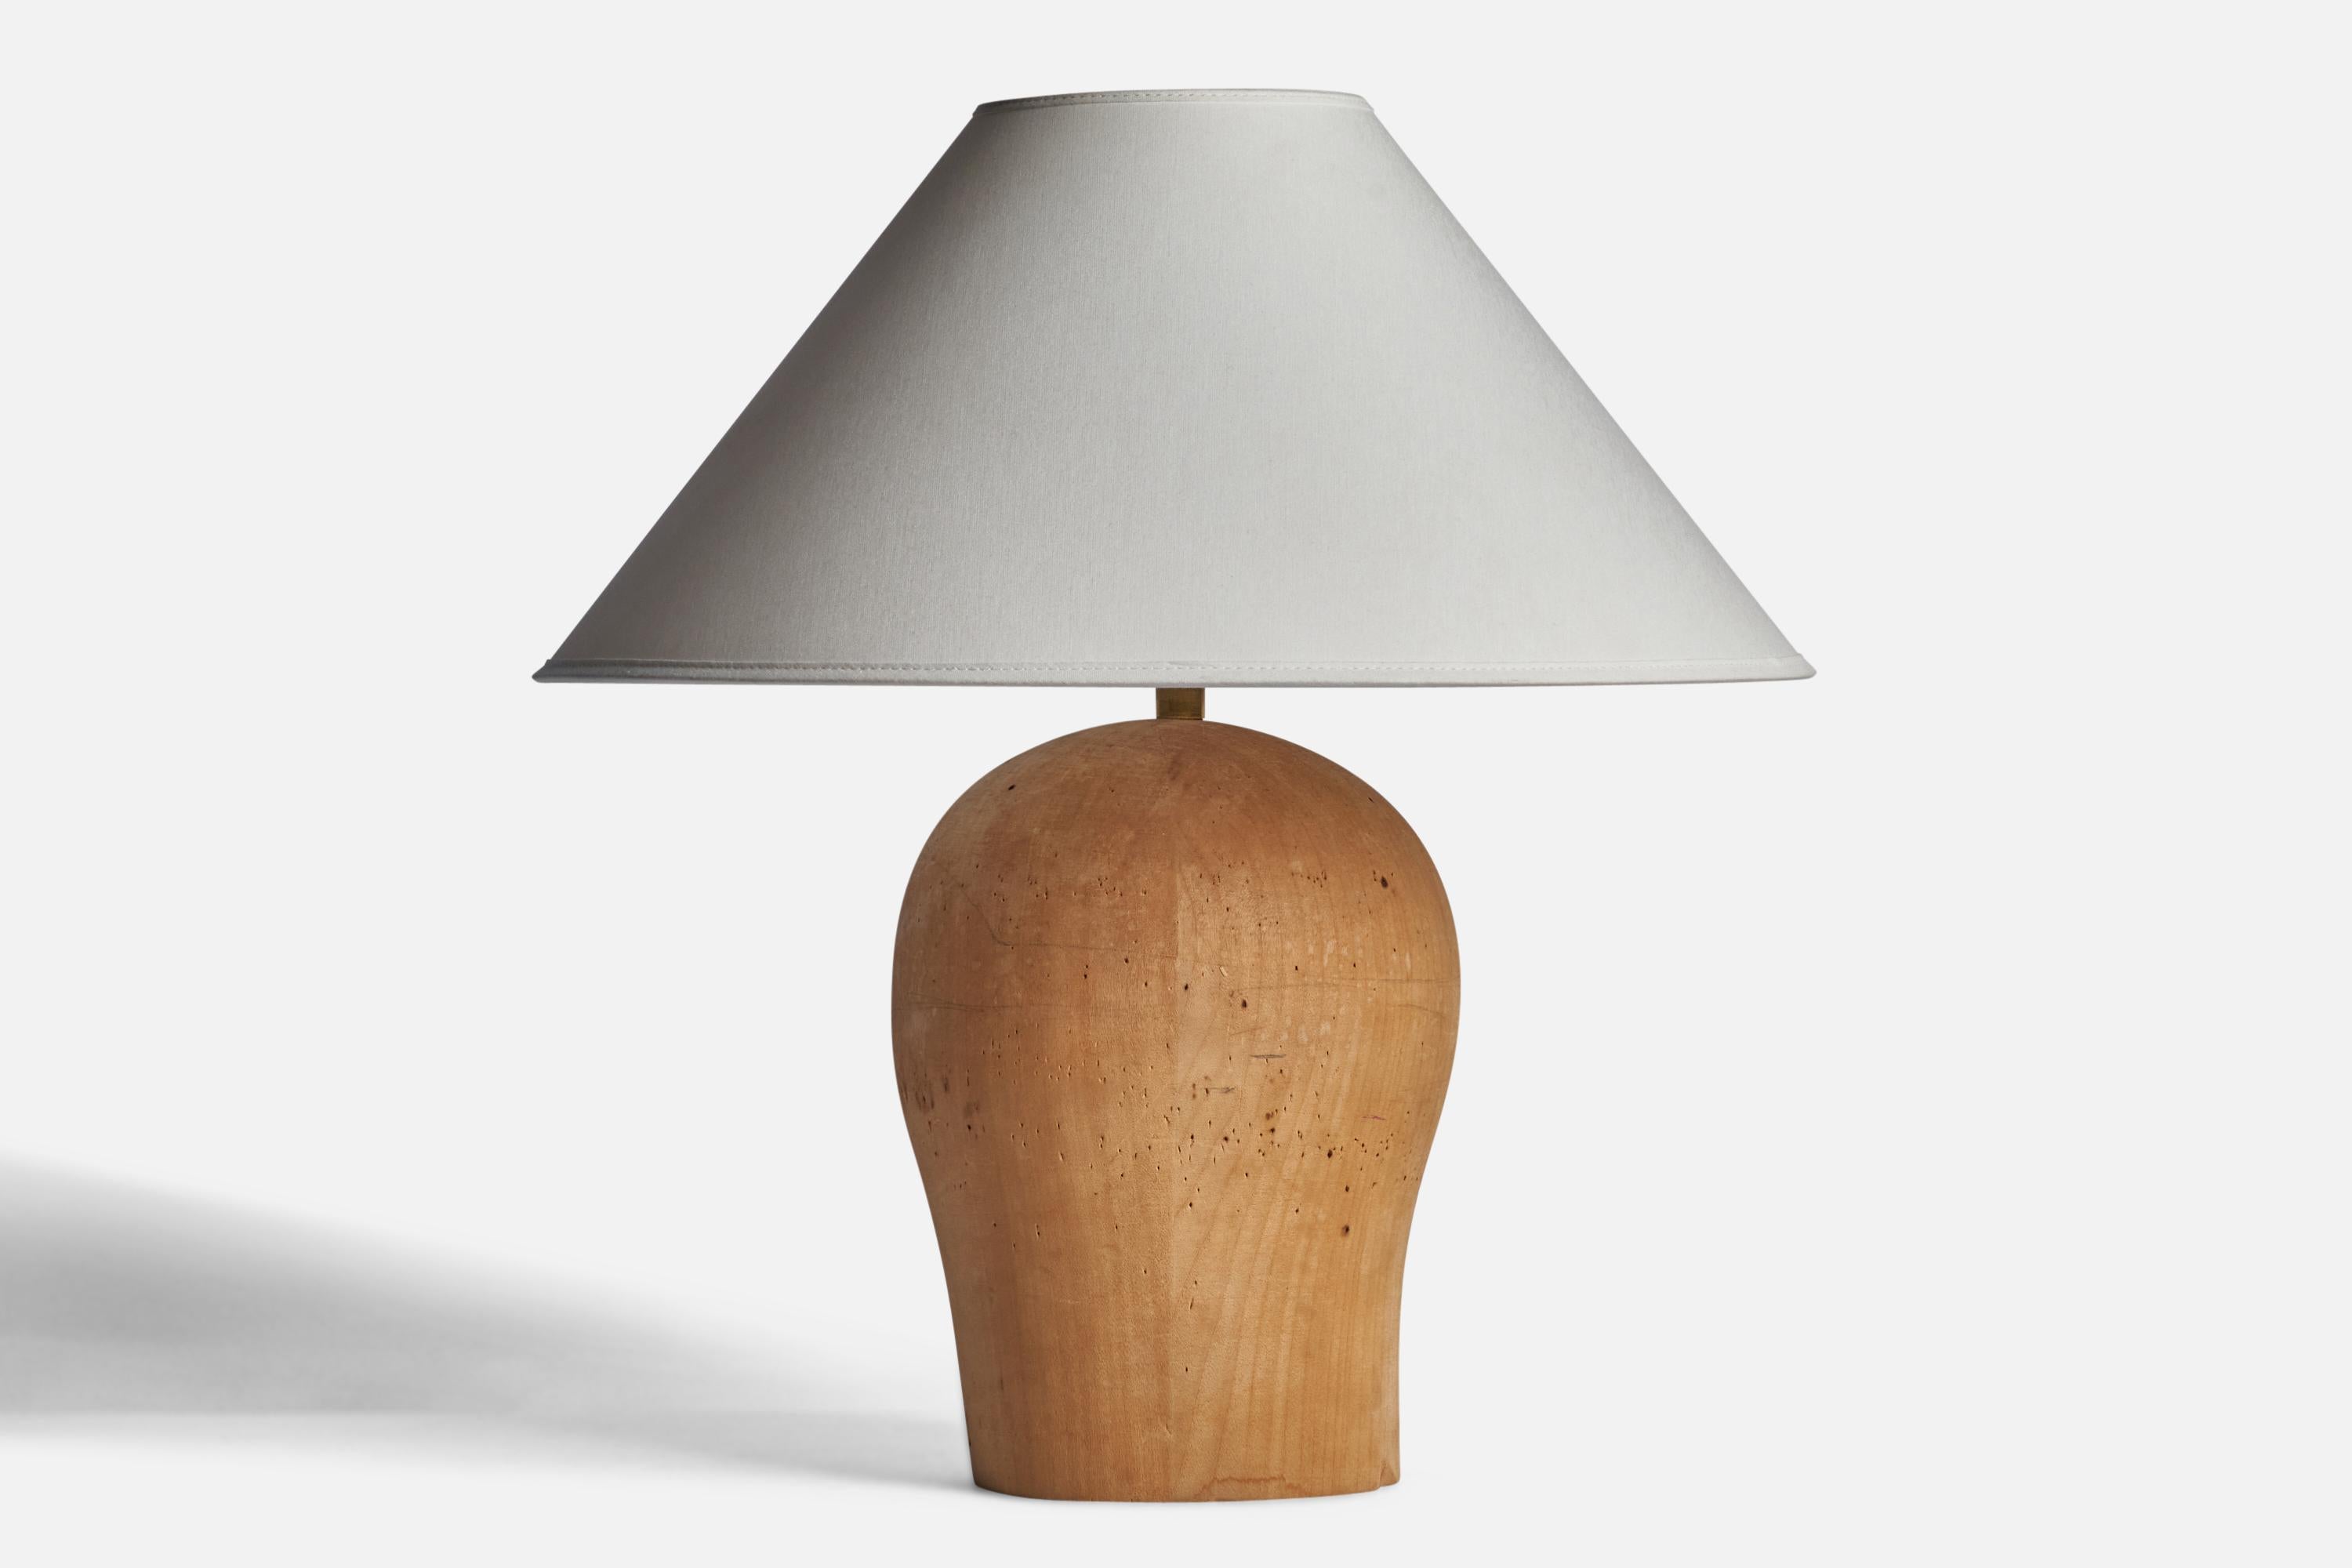 A wood table lamp designed and produced in Sweden, 1940s.

Dimensions of Lamp (inches): 12.25” H x 7.5” W x 5.75” D
Dimensions of Shade (inches): 4.5” Top Diameter x 15.75” Bottom Diameter x 9” H
Dimensions of Lamp with Shade (inches): 17.5” H x